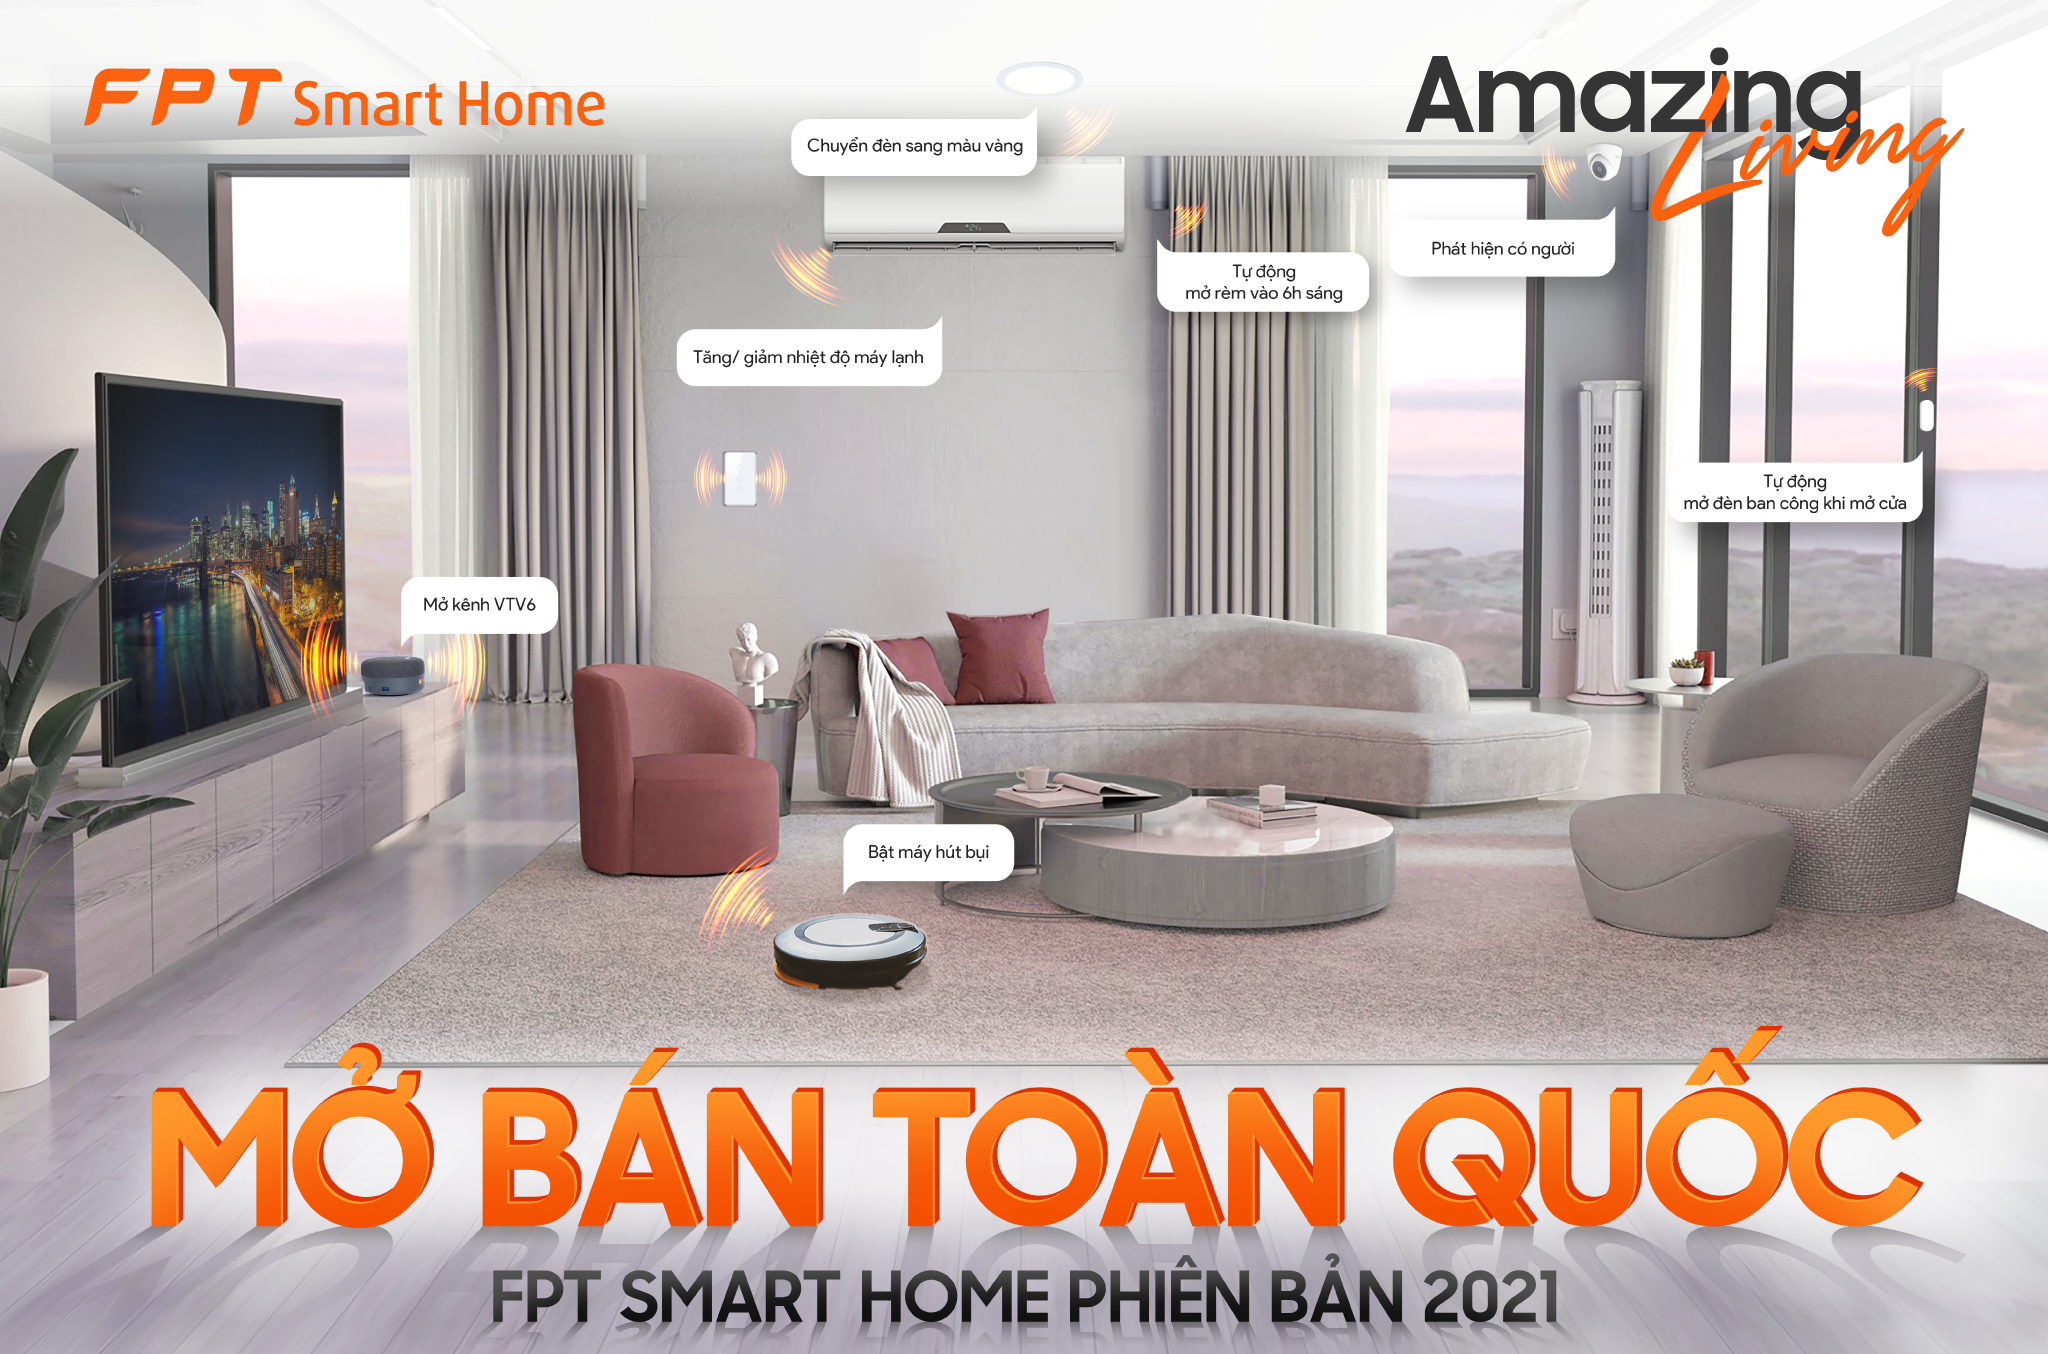 fpt-smart-home-mo-ban-toan-quoc-1